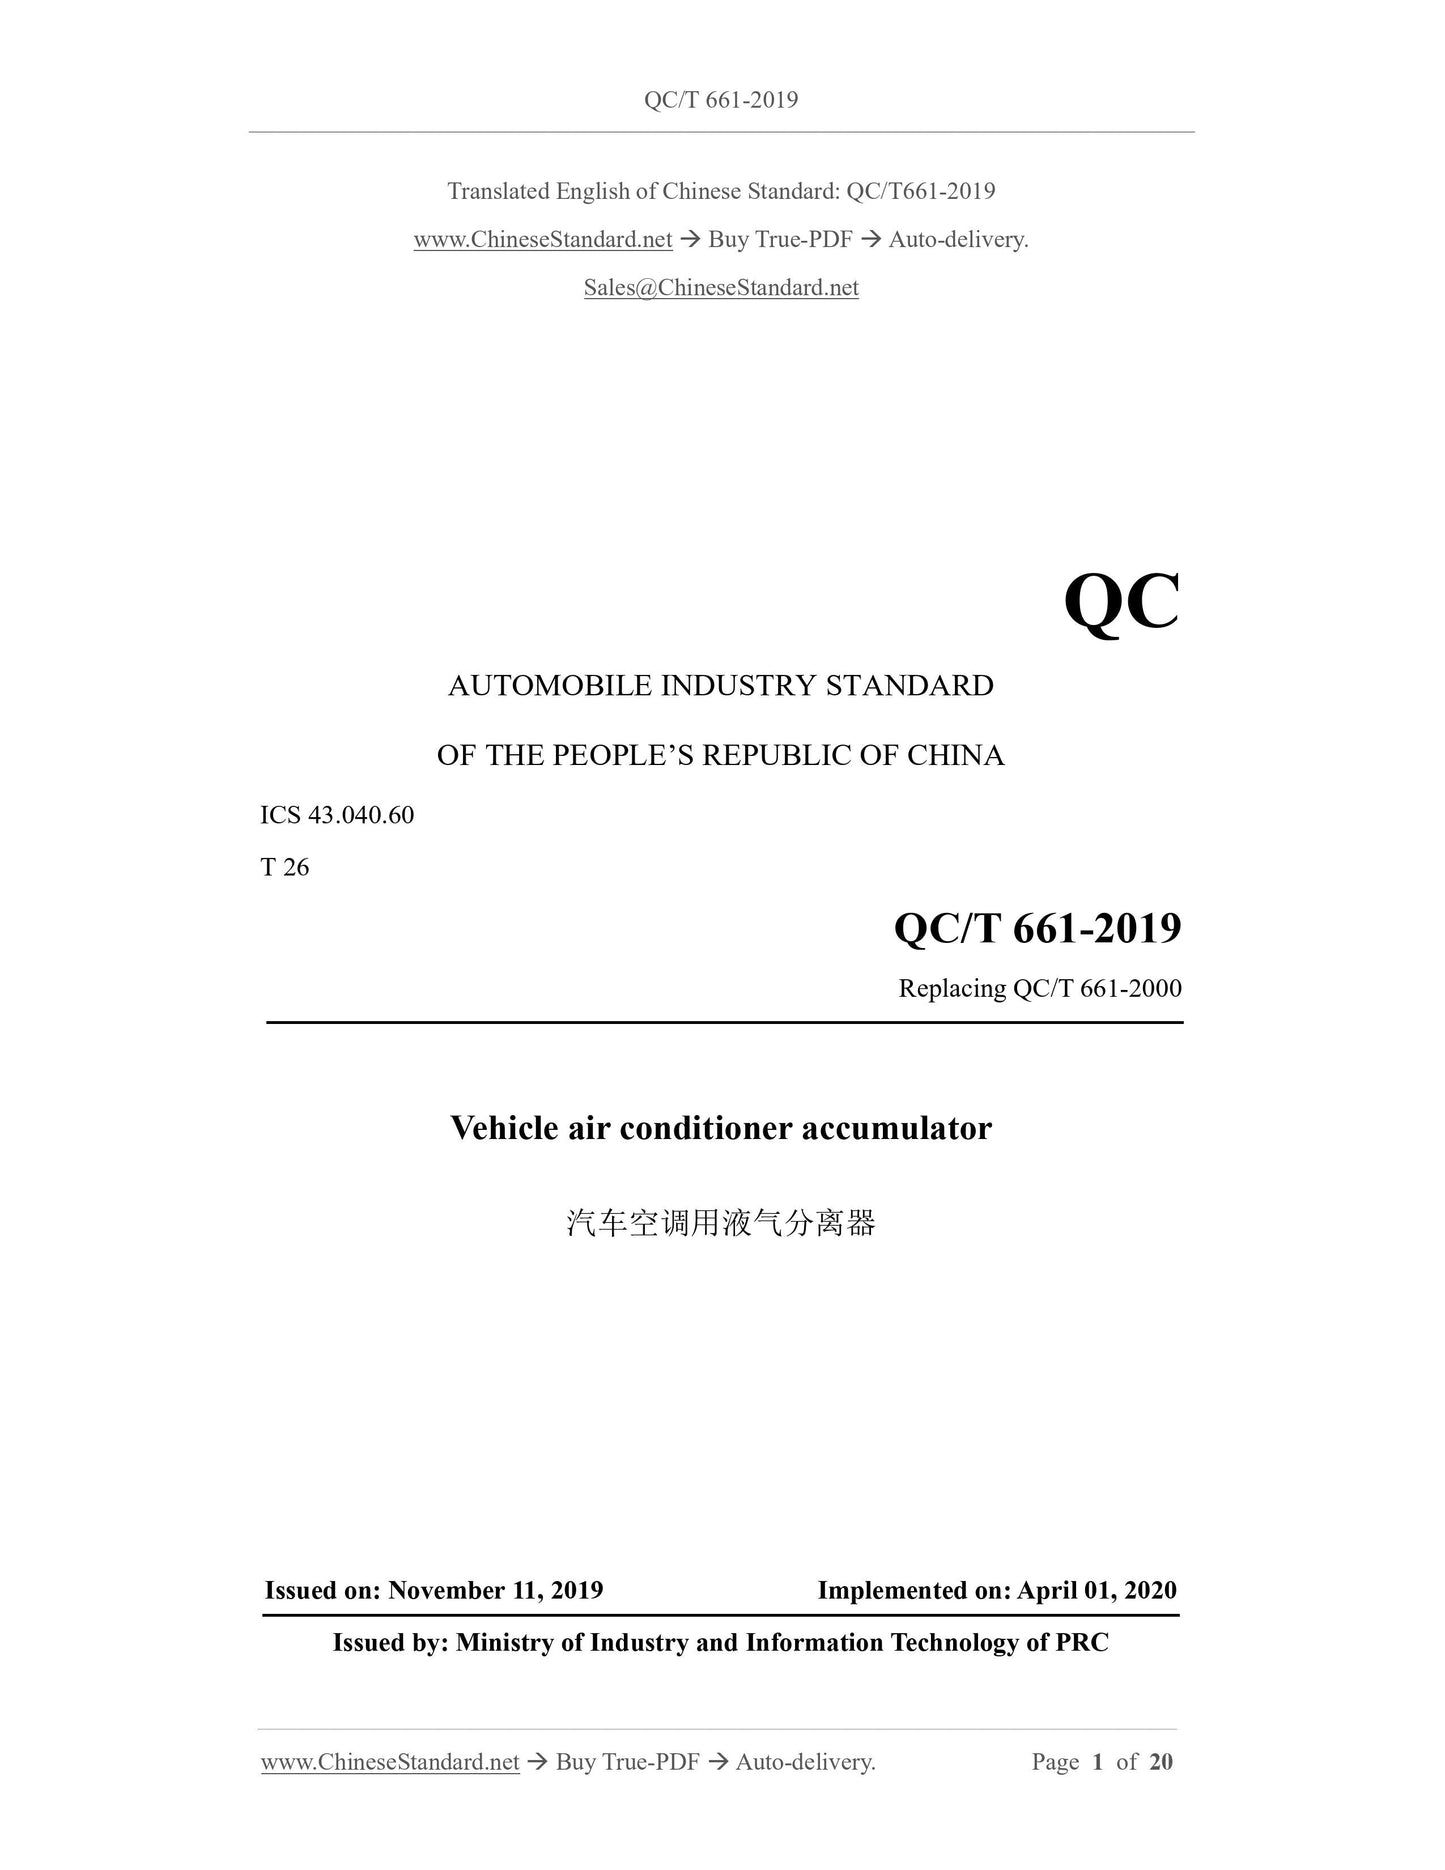 QC/T 661-2019 Page 1